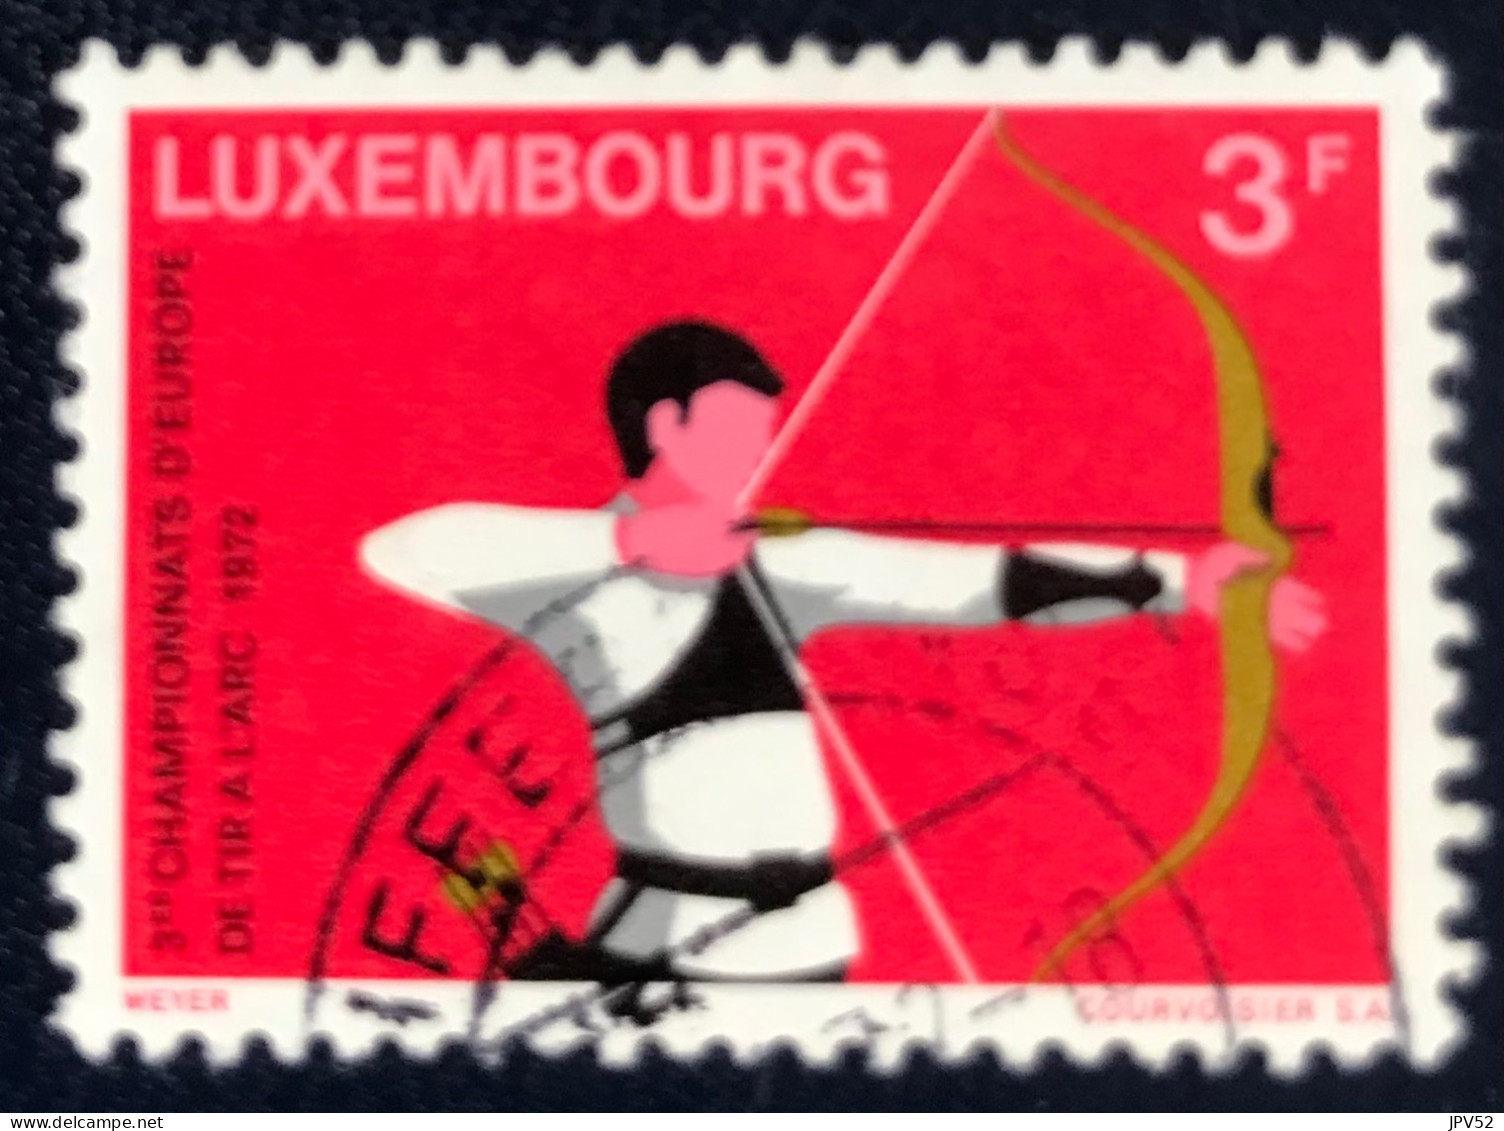 Luxembourg - Luxemburg - C18/31 - 1972 - (°)used - Michel 848 - Boogschutter - Used Stamps